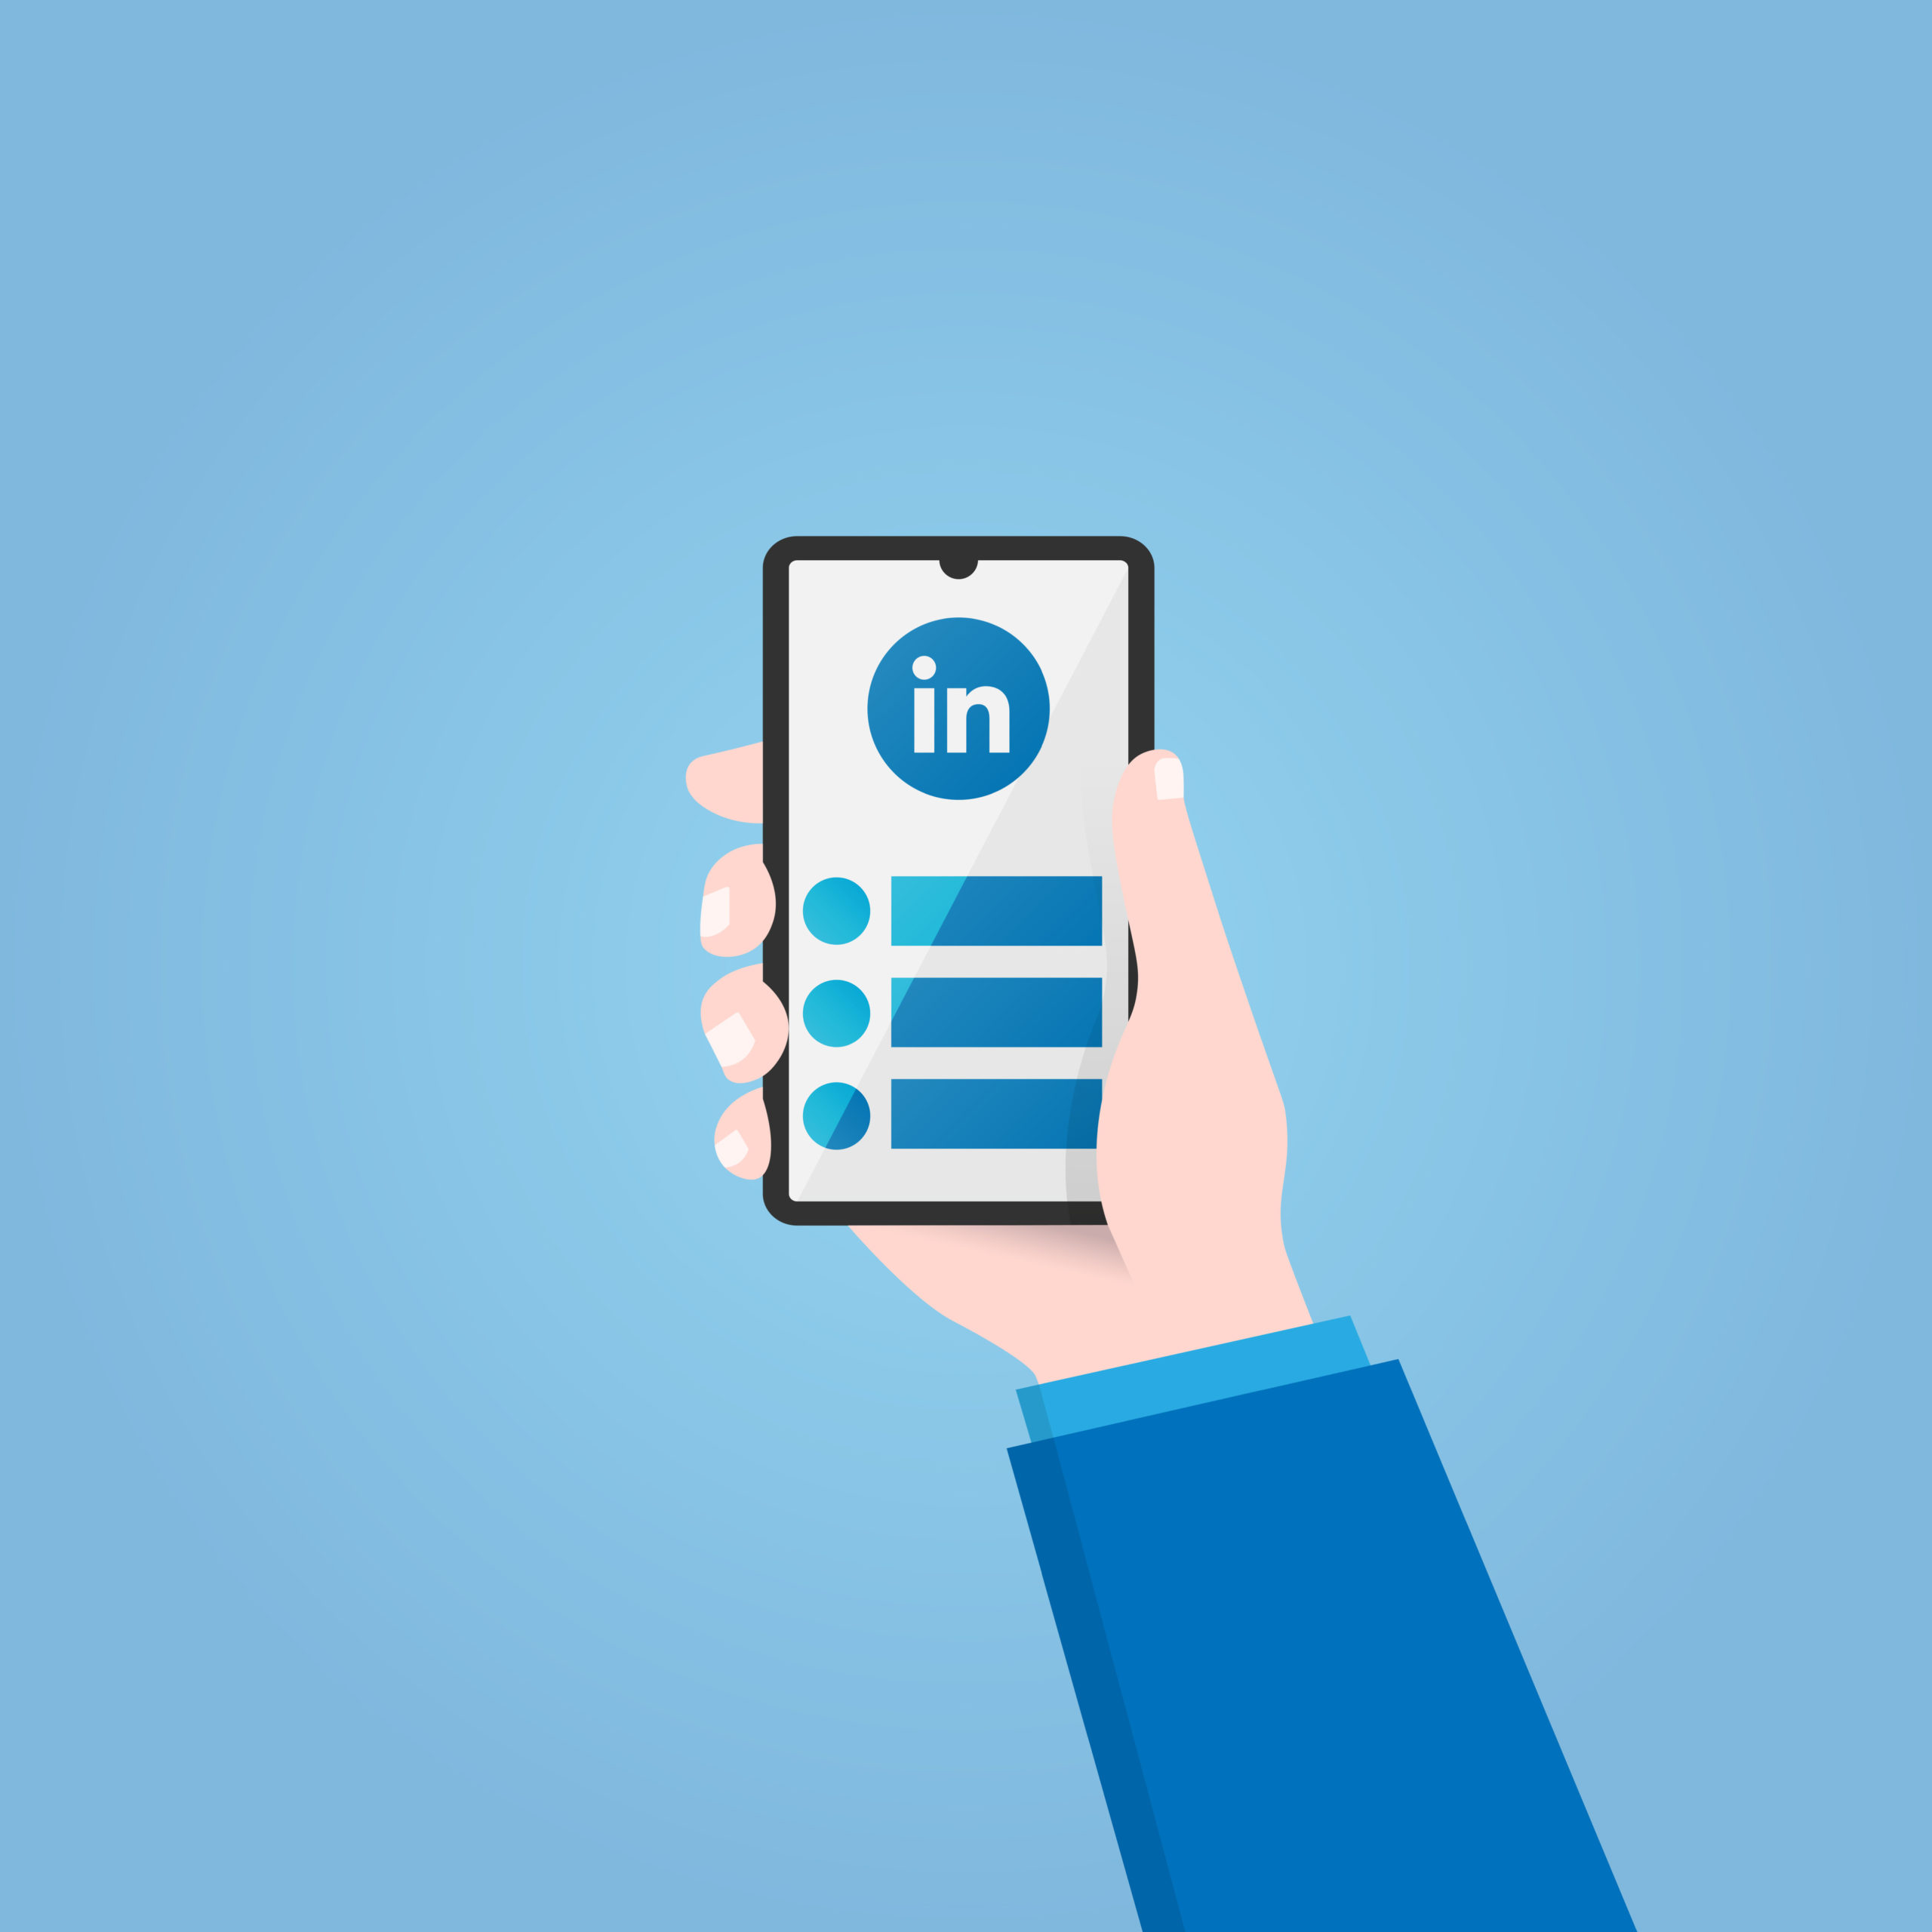 8 Ways to Use the LinkedIn Mobile App for Business